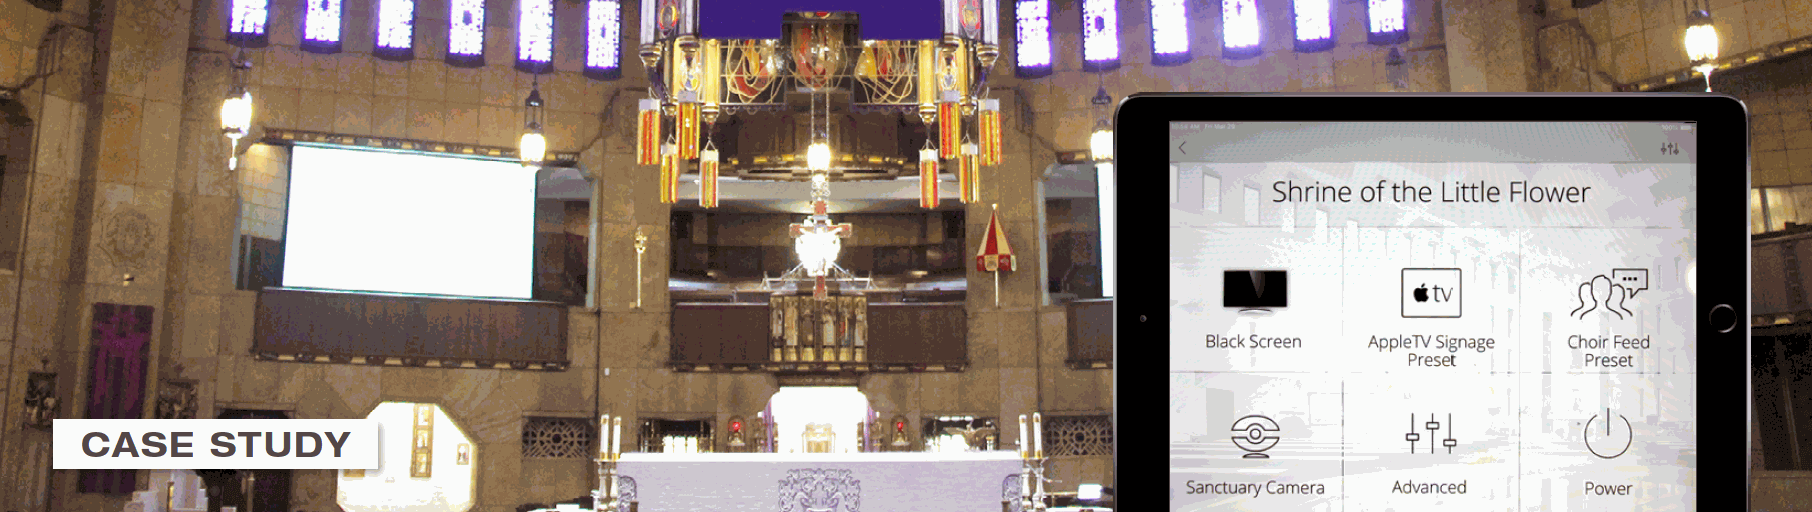 National Shrine Benefits Enhanced with Key Digital’s Powerful AV over IP System and Compass Control® Pro sound system for church